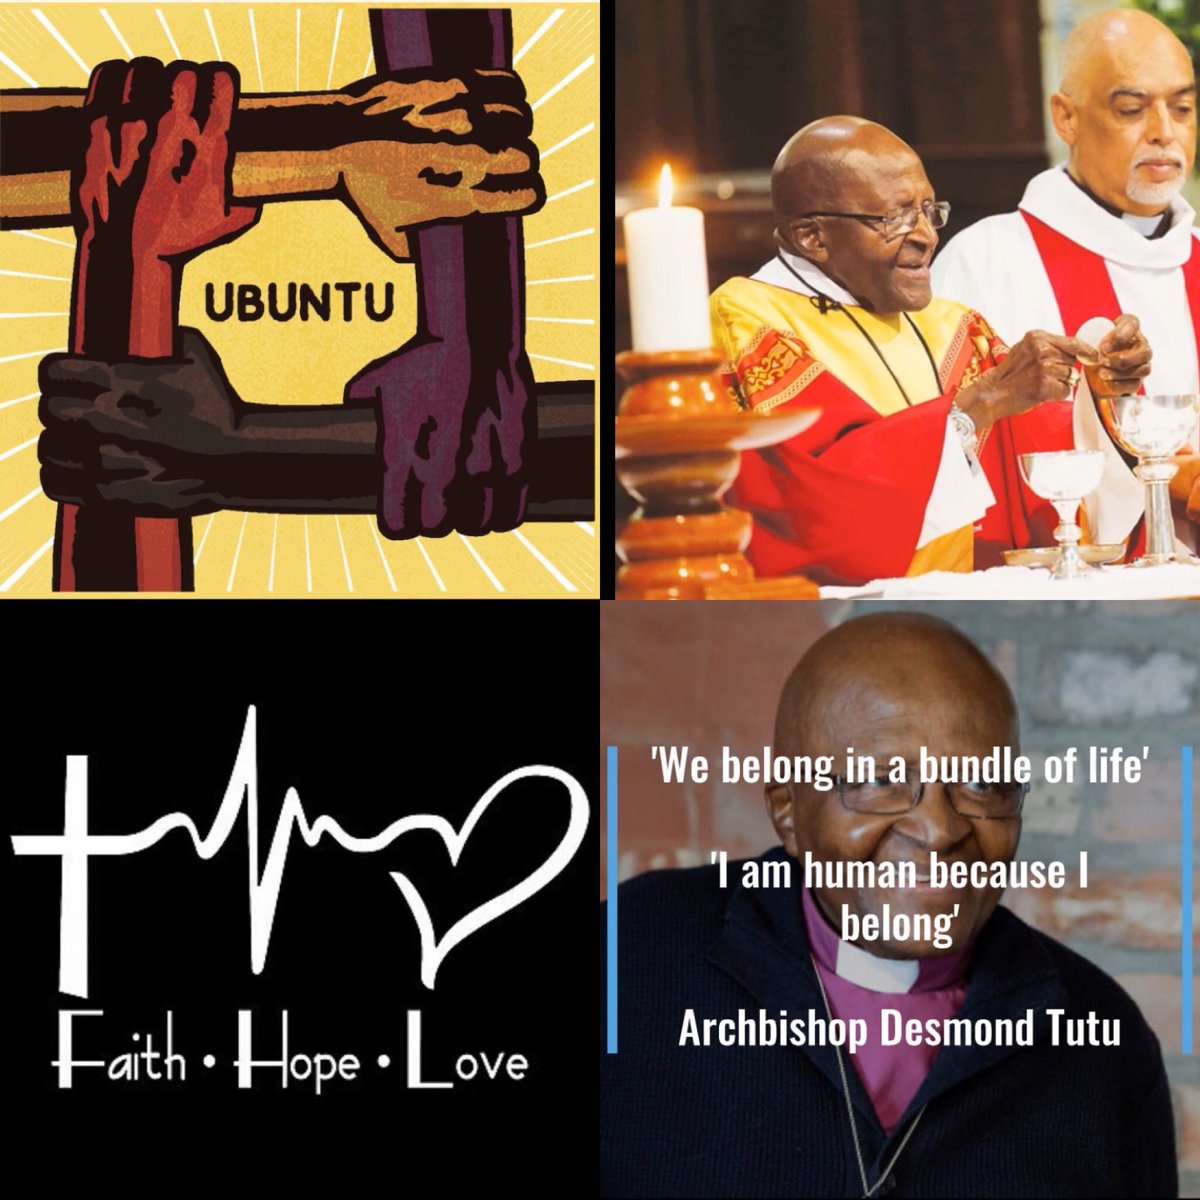 Come to @StMarylebone Assembly!
This weeks theme #Ubuntu - essential stuff for #today : what future shall be build together? #coronavirus @DesmondTutuCen1 #DesmondTutu #hope #schoolassembly #together watch it here:  youtu.be/ml6N5FH16Qw @LDBS1836 @WoodardSchools